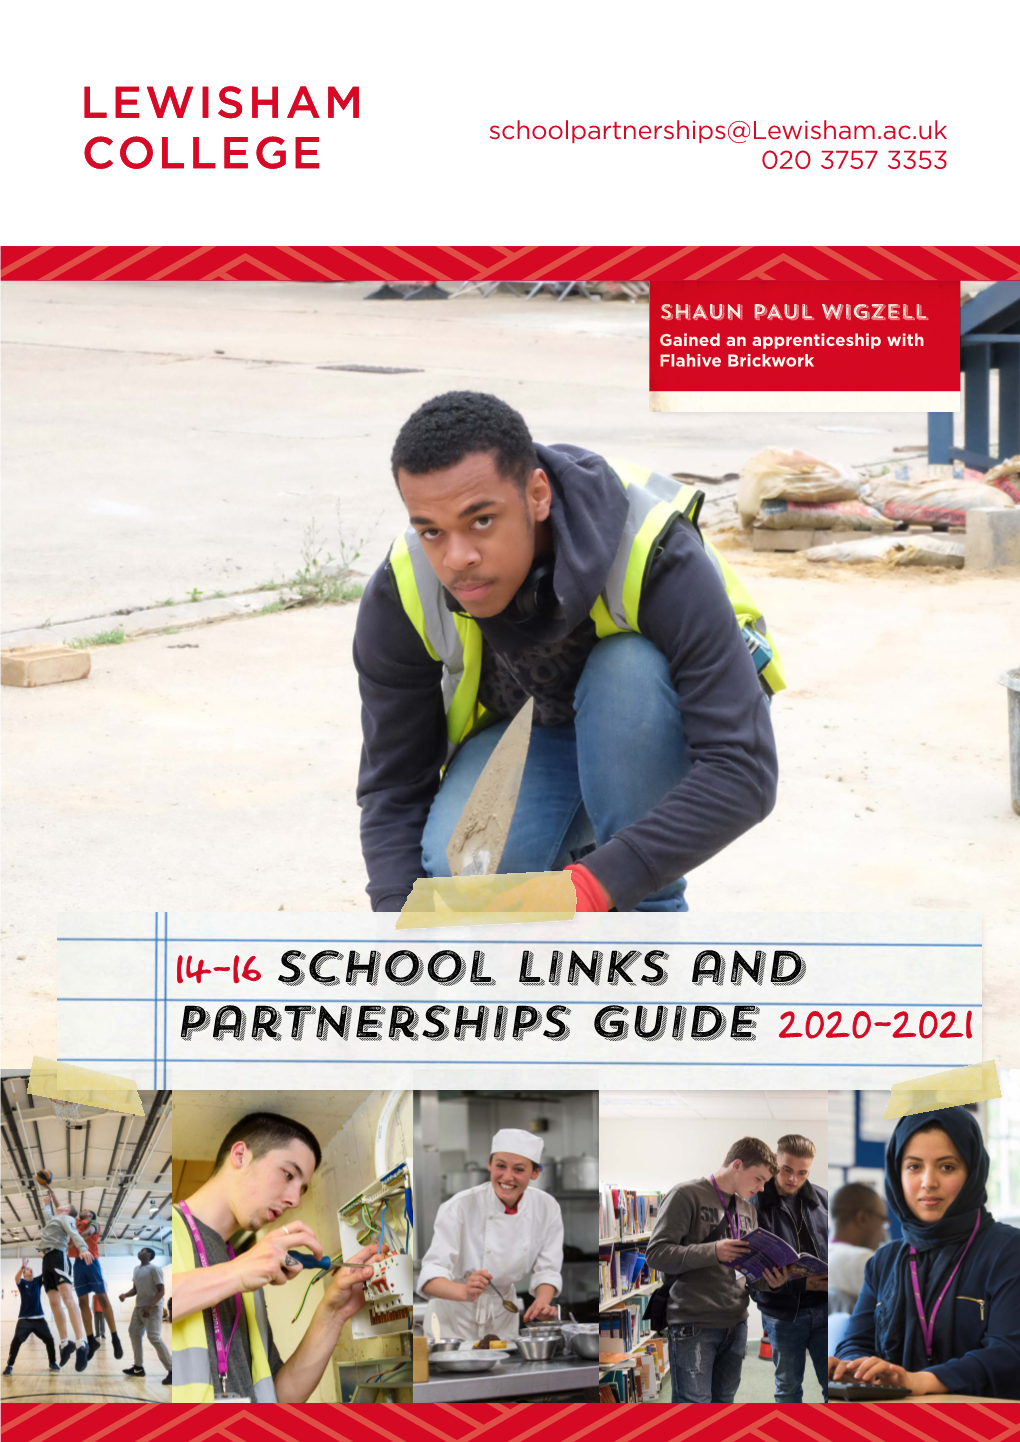 14-16 School Links and Partnerships Guide 2020-2021 the ADMISSIONS PROCESS